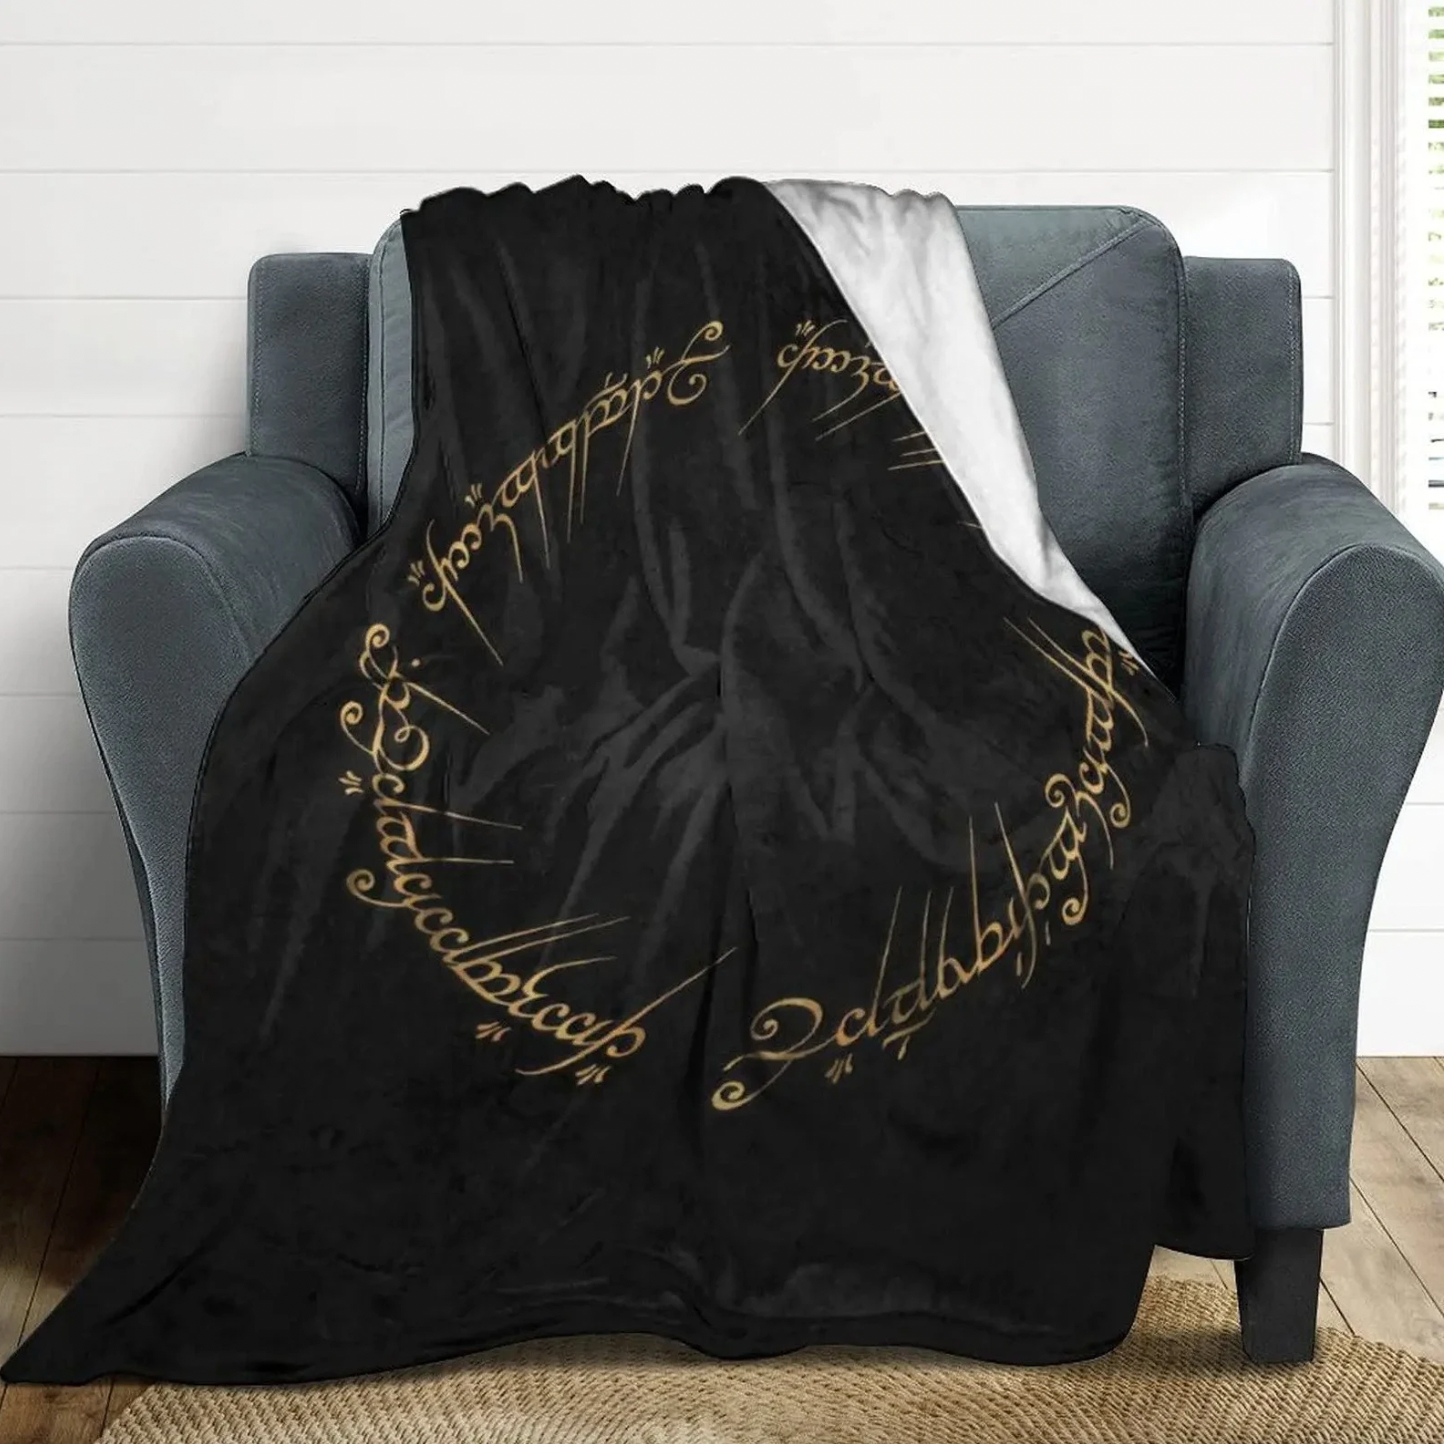 L-Lord of the Rings blanket fashion blanket Warm Blanket Flannel